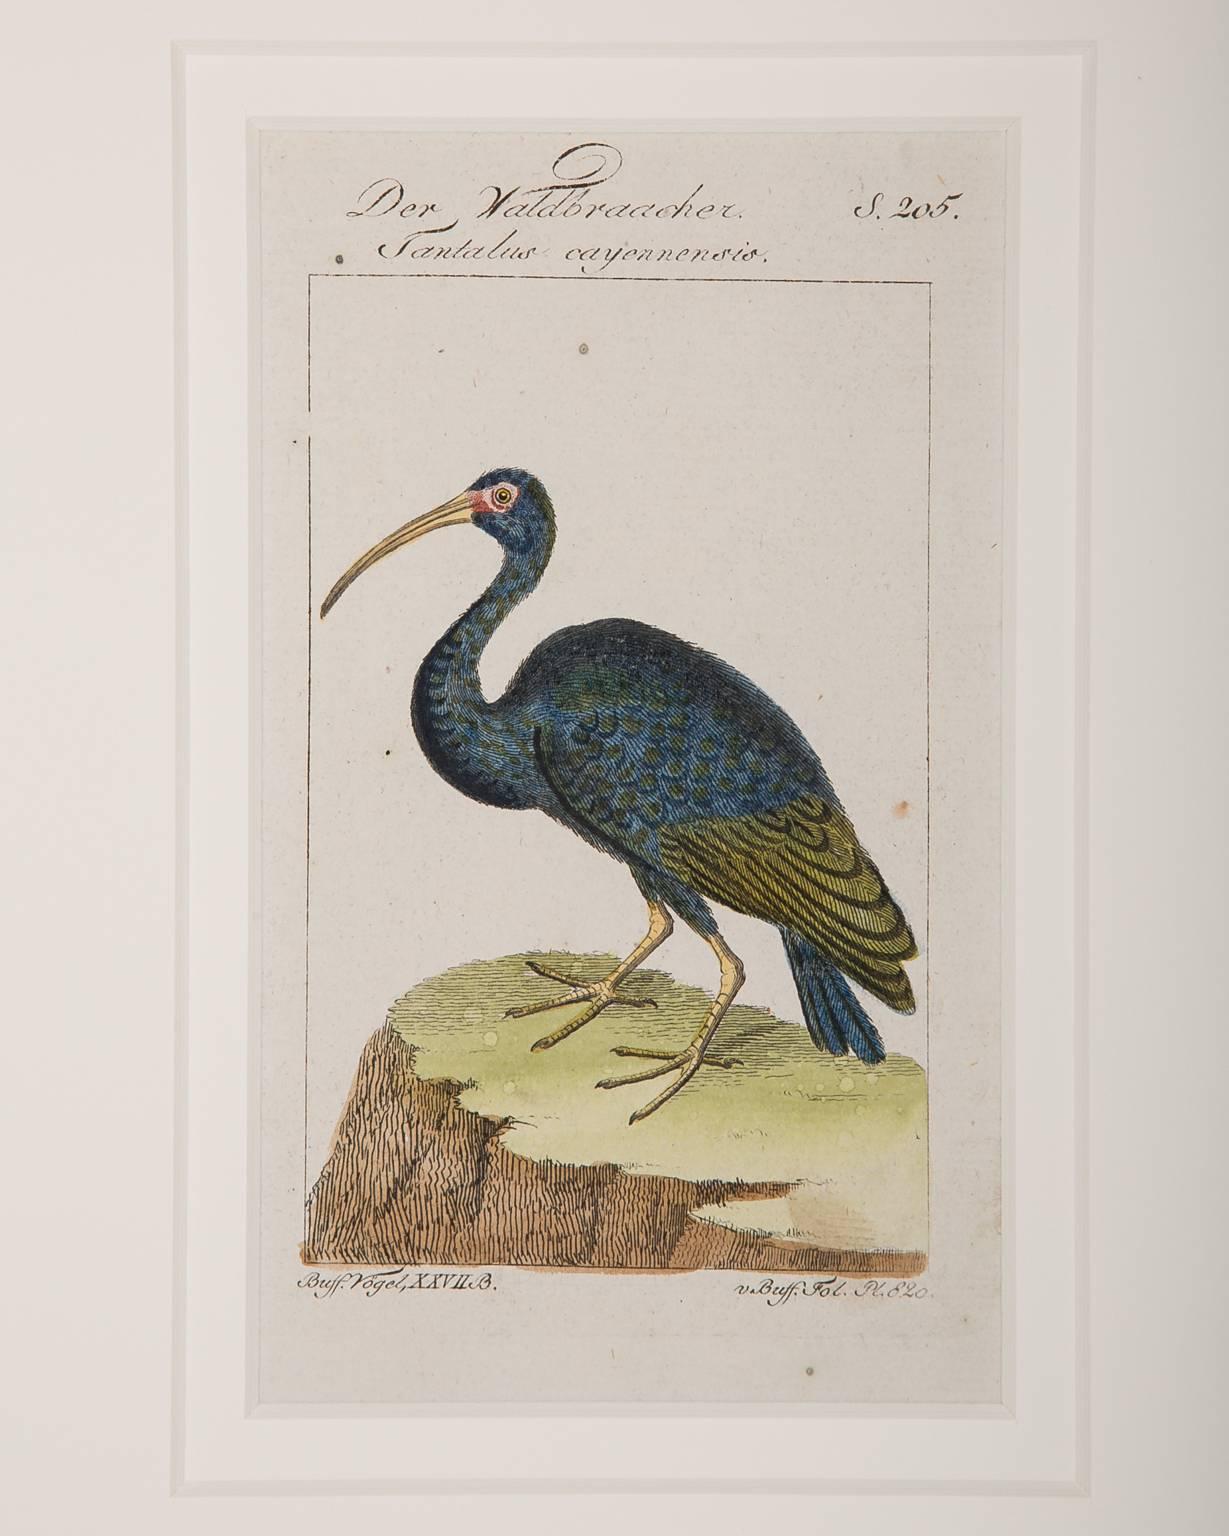 Engraved Bird Engravings on Paper Audubon Style by Francois-Nicolas Martinet  Group #2